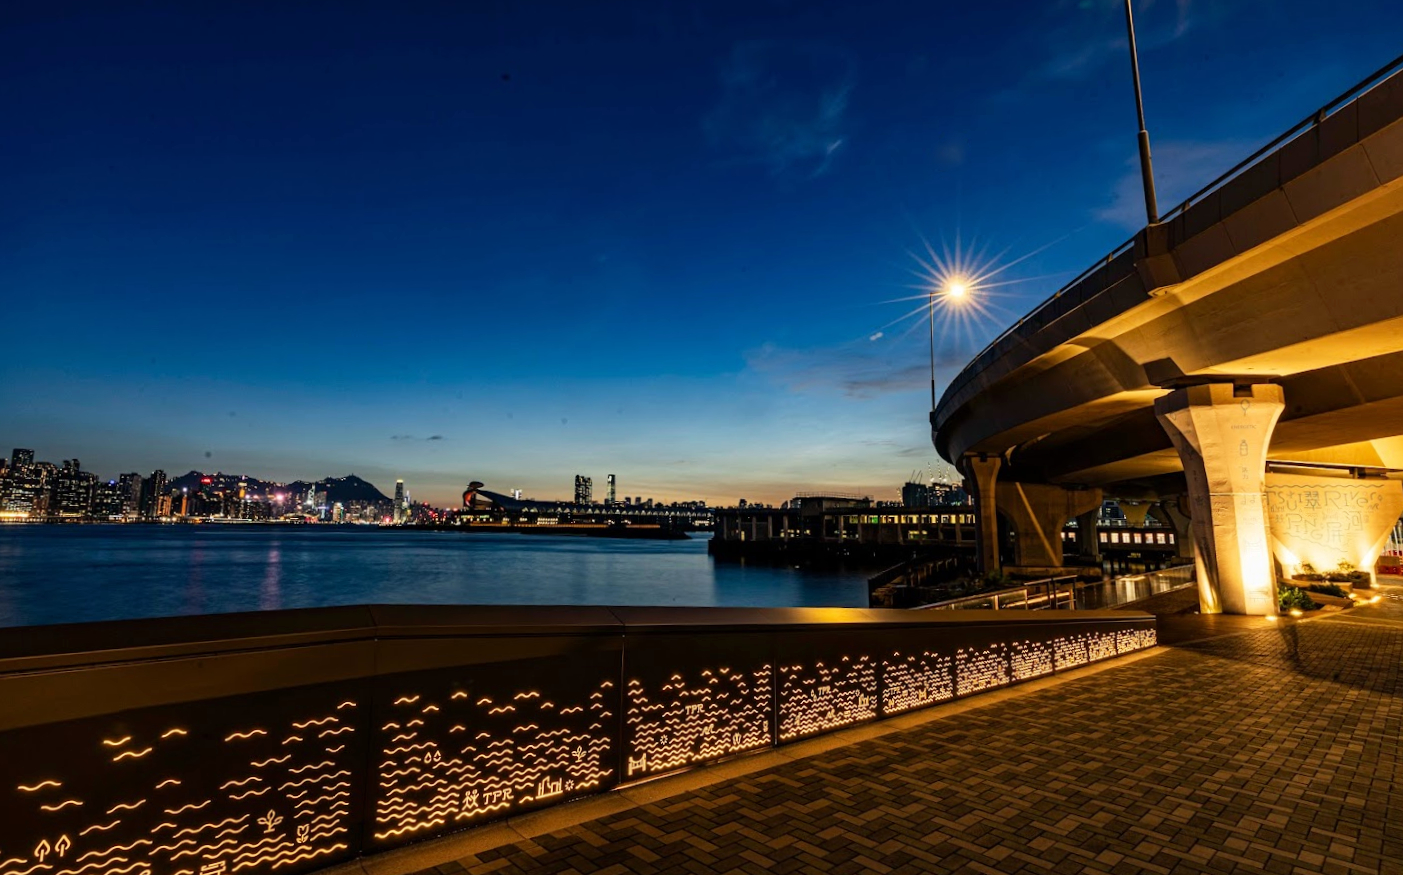 The Cha Kwo Ling Promenade and Tsui Ping Seaside officially opened today (August 24). Photo shows the night view of Victoria Harbour from the cross-river footbridge of the Tsui Ping Seaside.